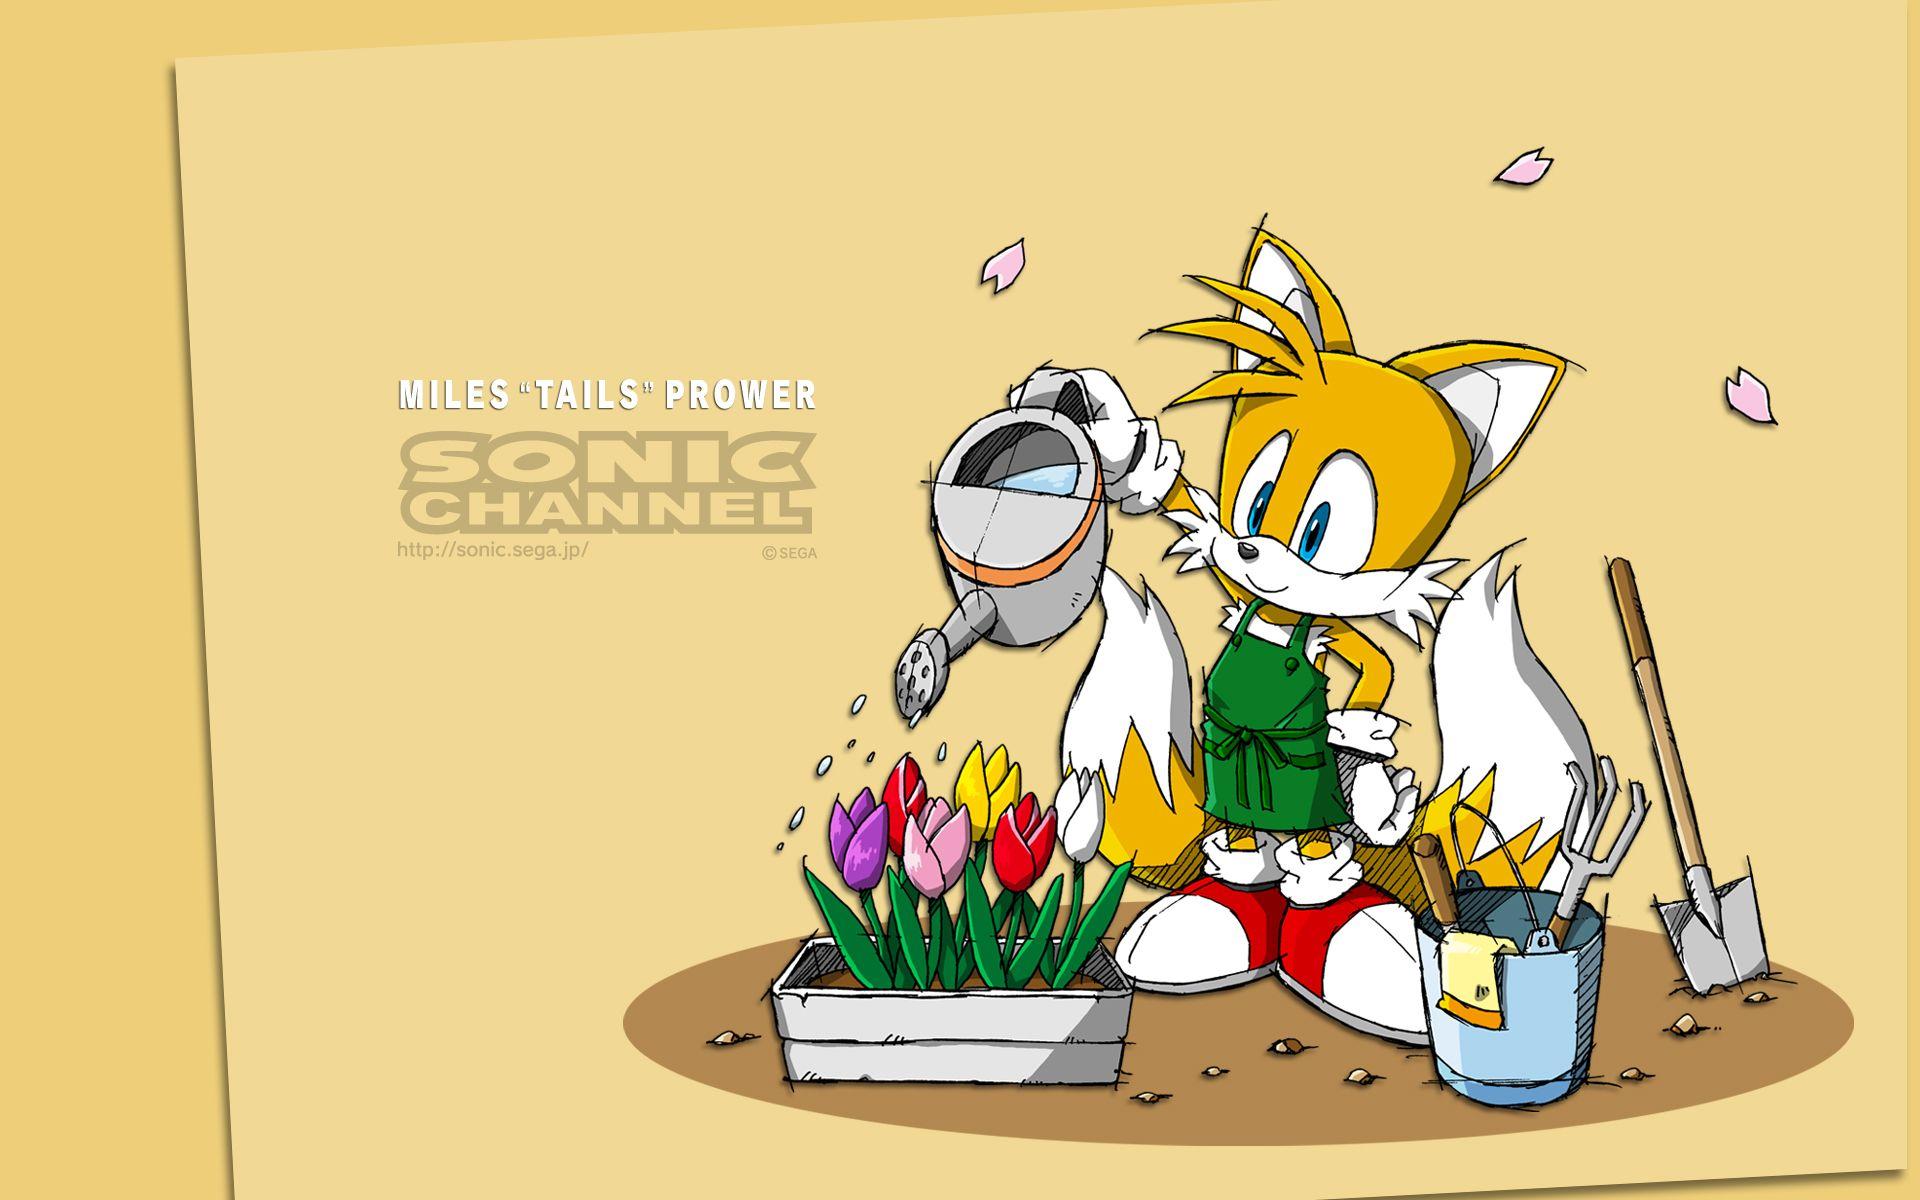 04 Tails Prower Channel